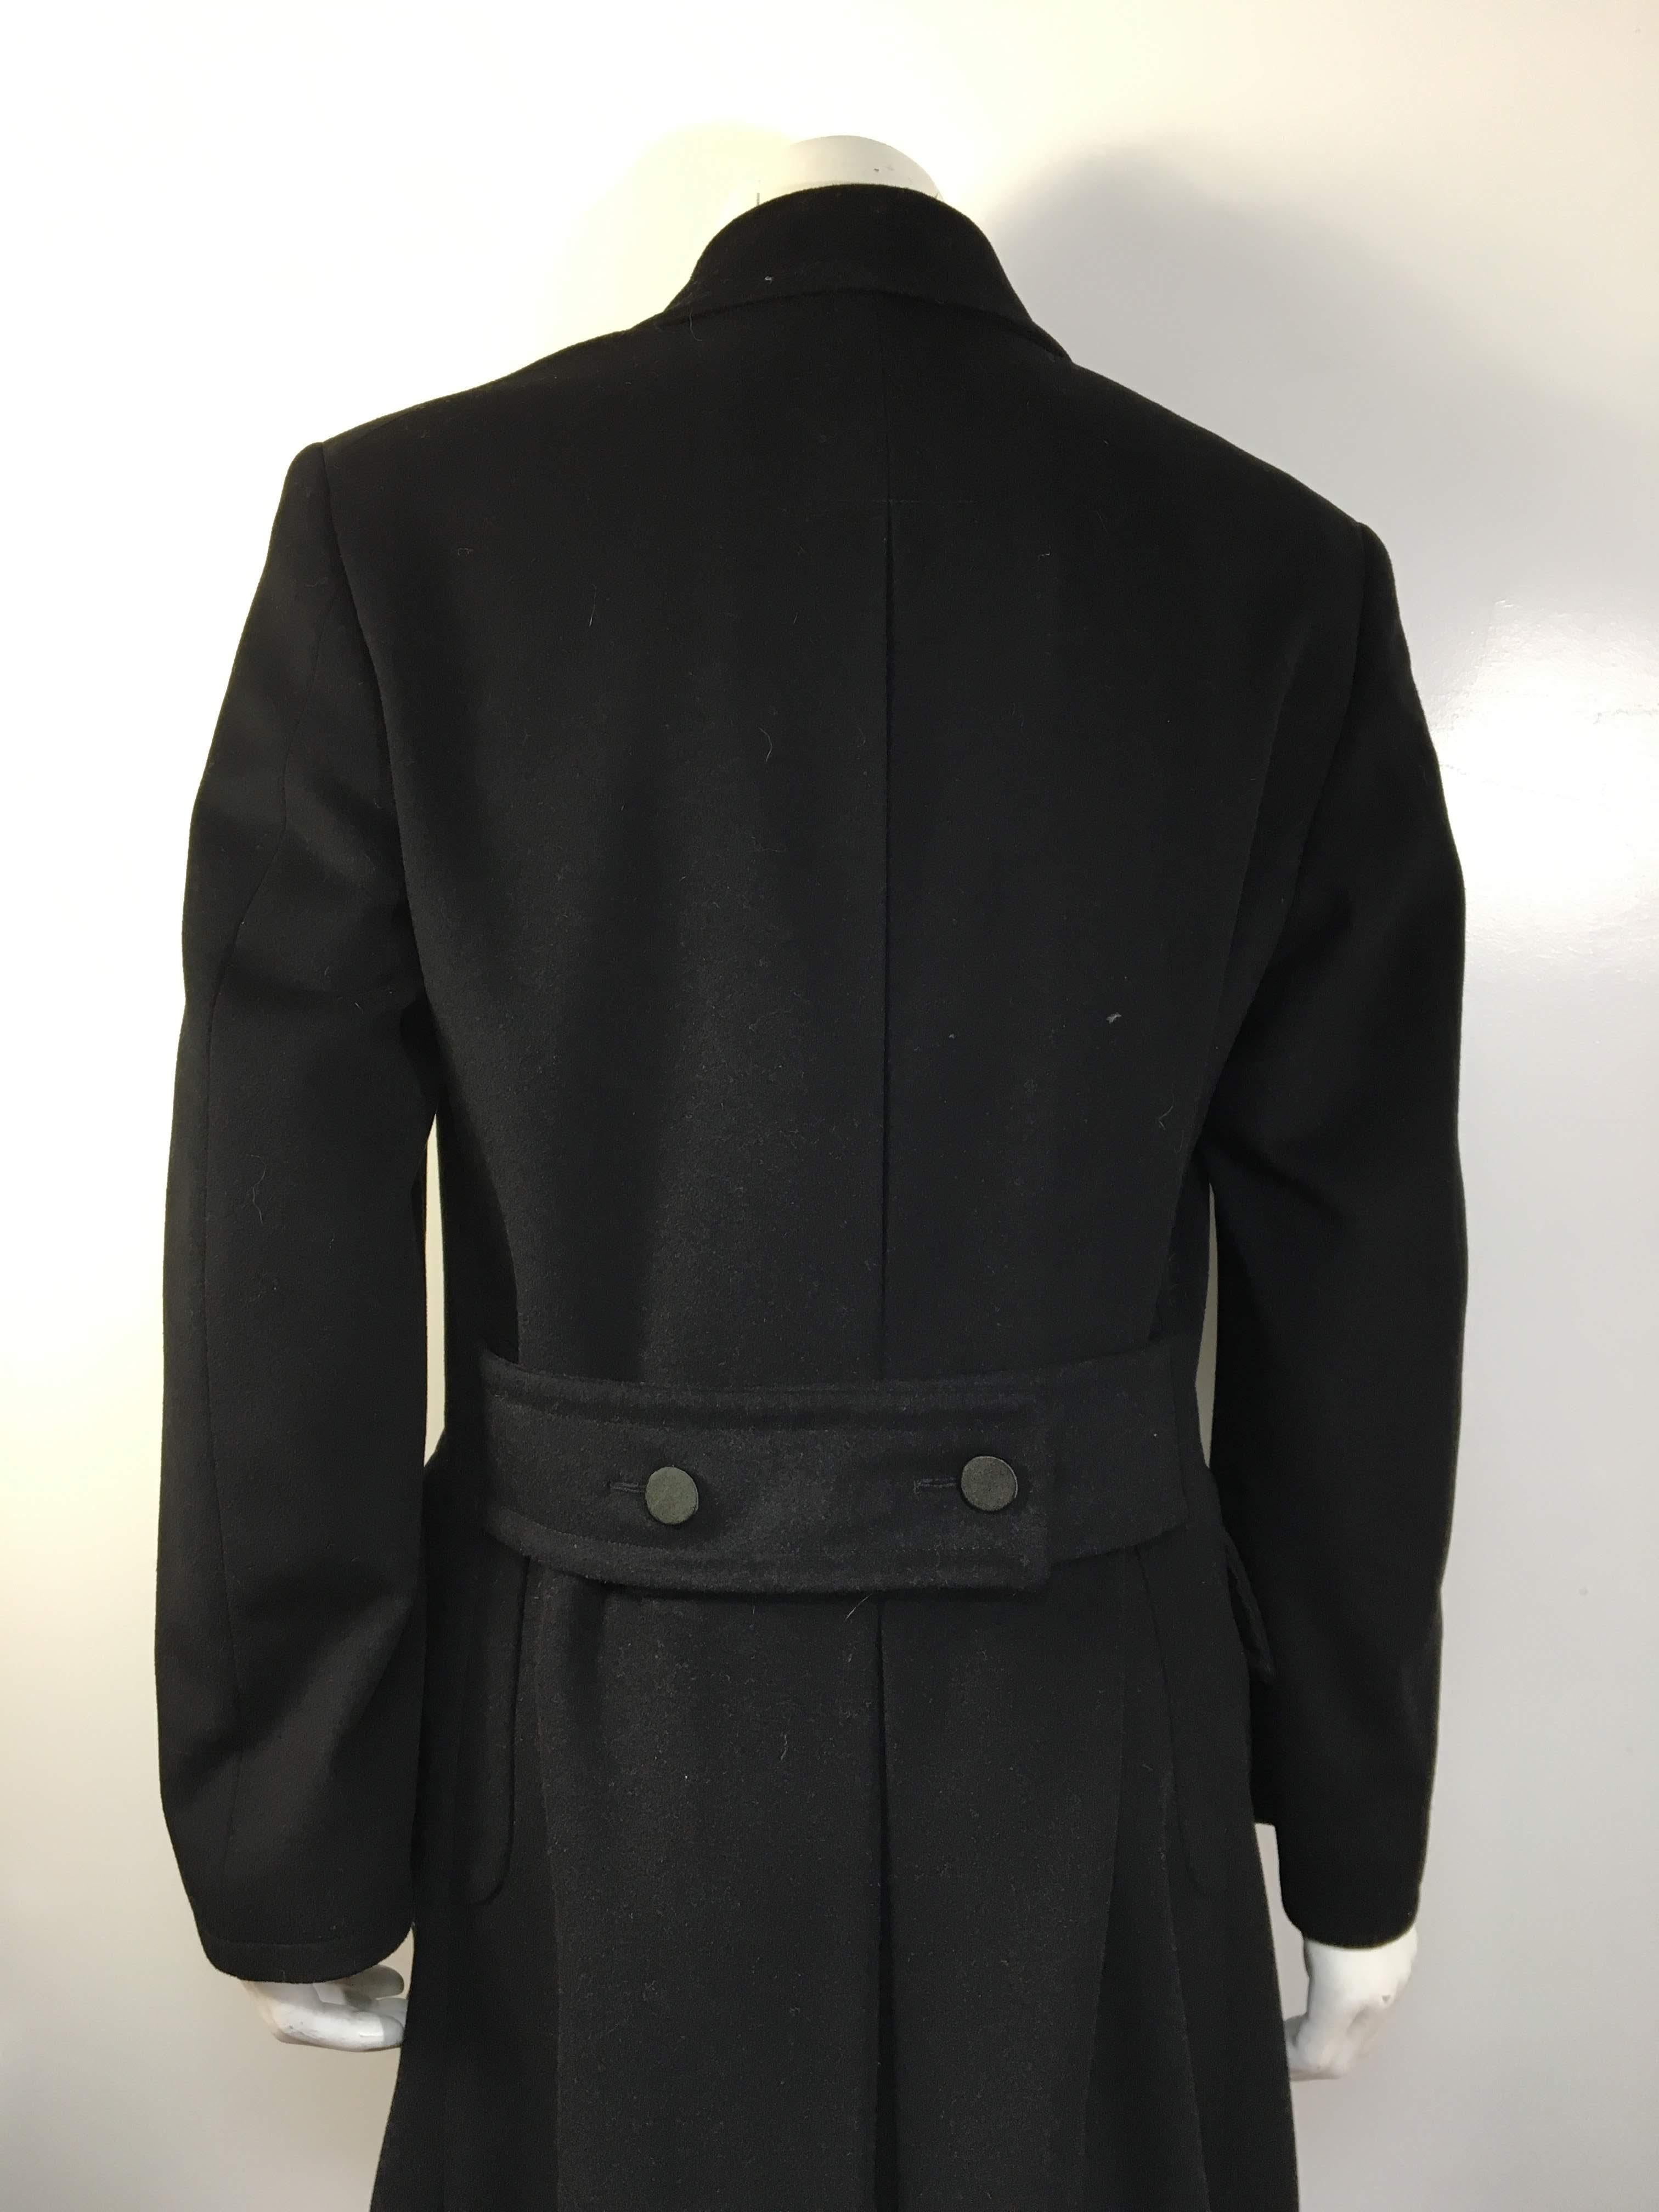 Men's Gucci Black Wool & Cashmere Trench Coat 2